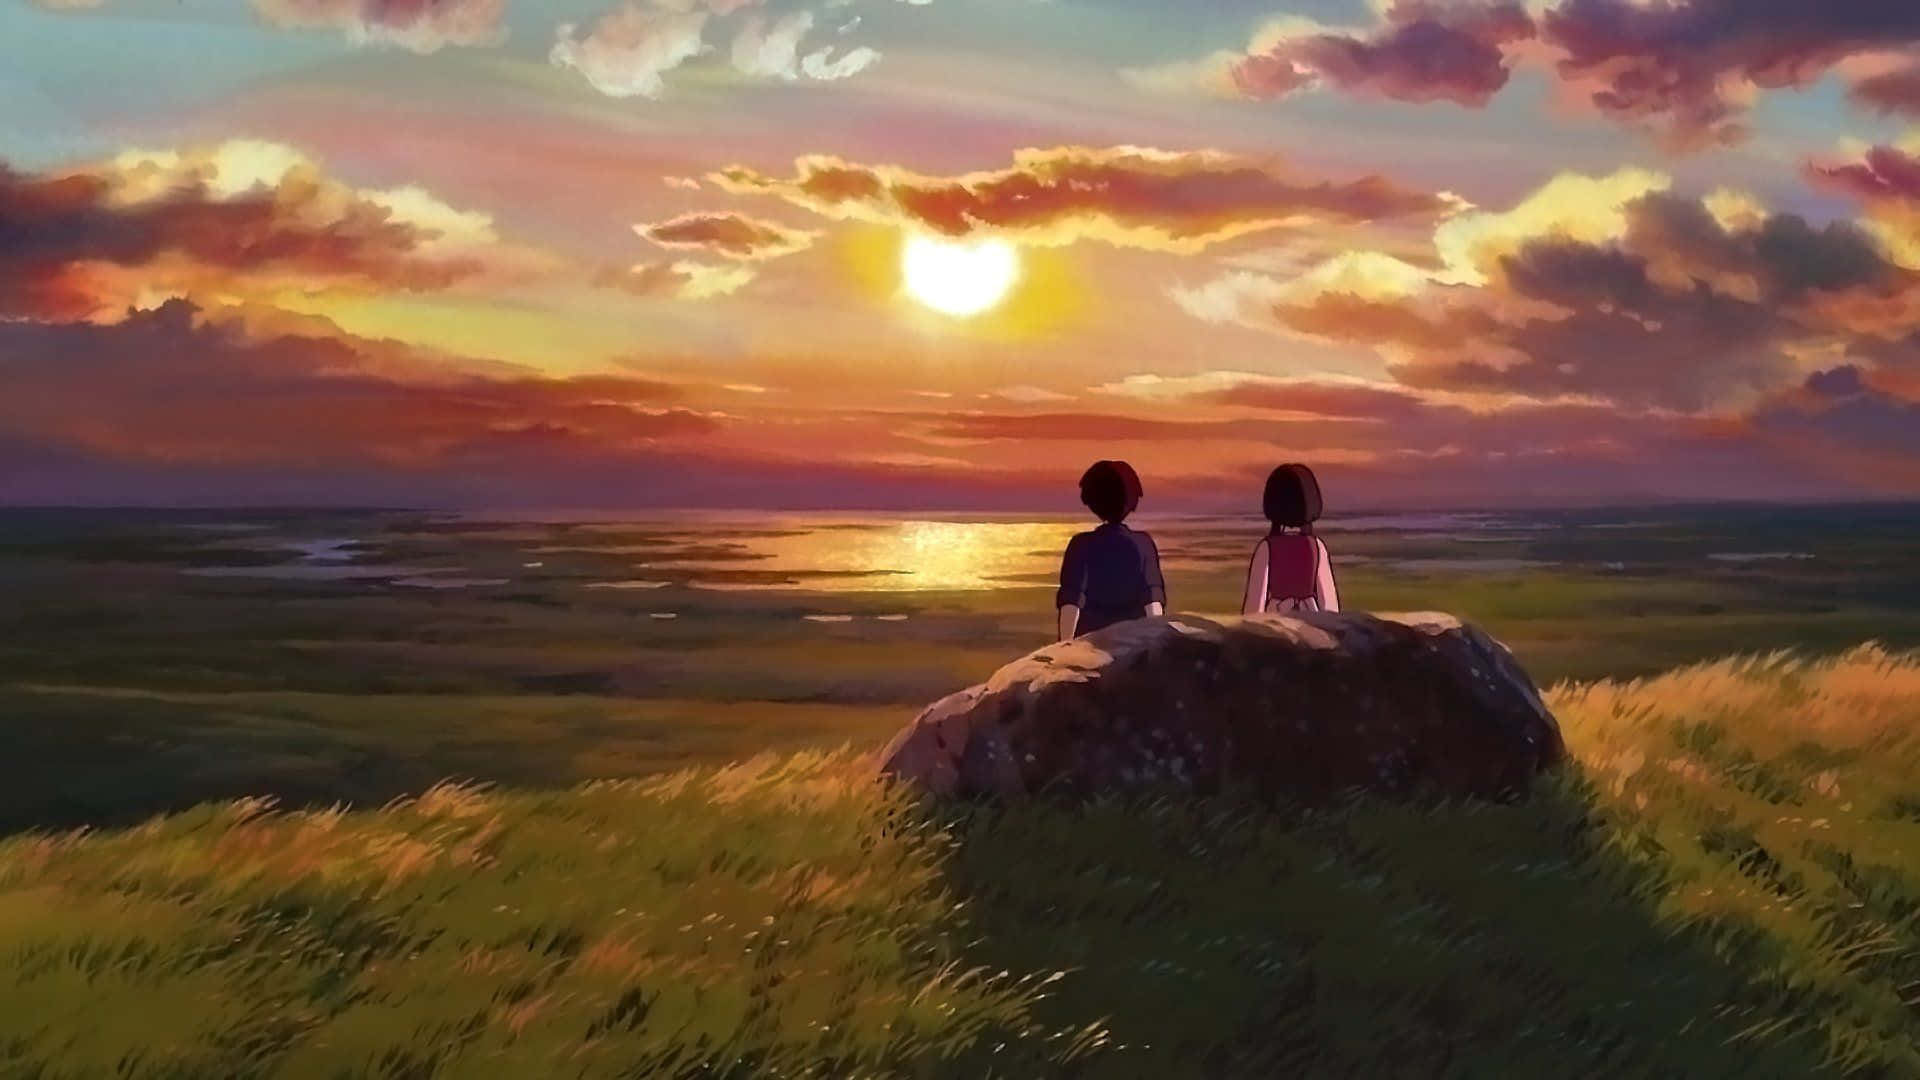 A magical encounter in Tales From Earthsea Wallpaper